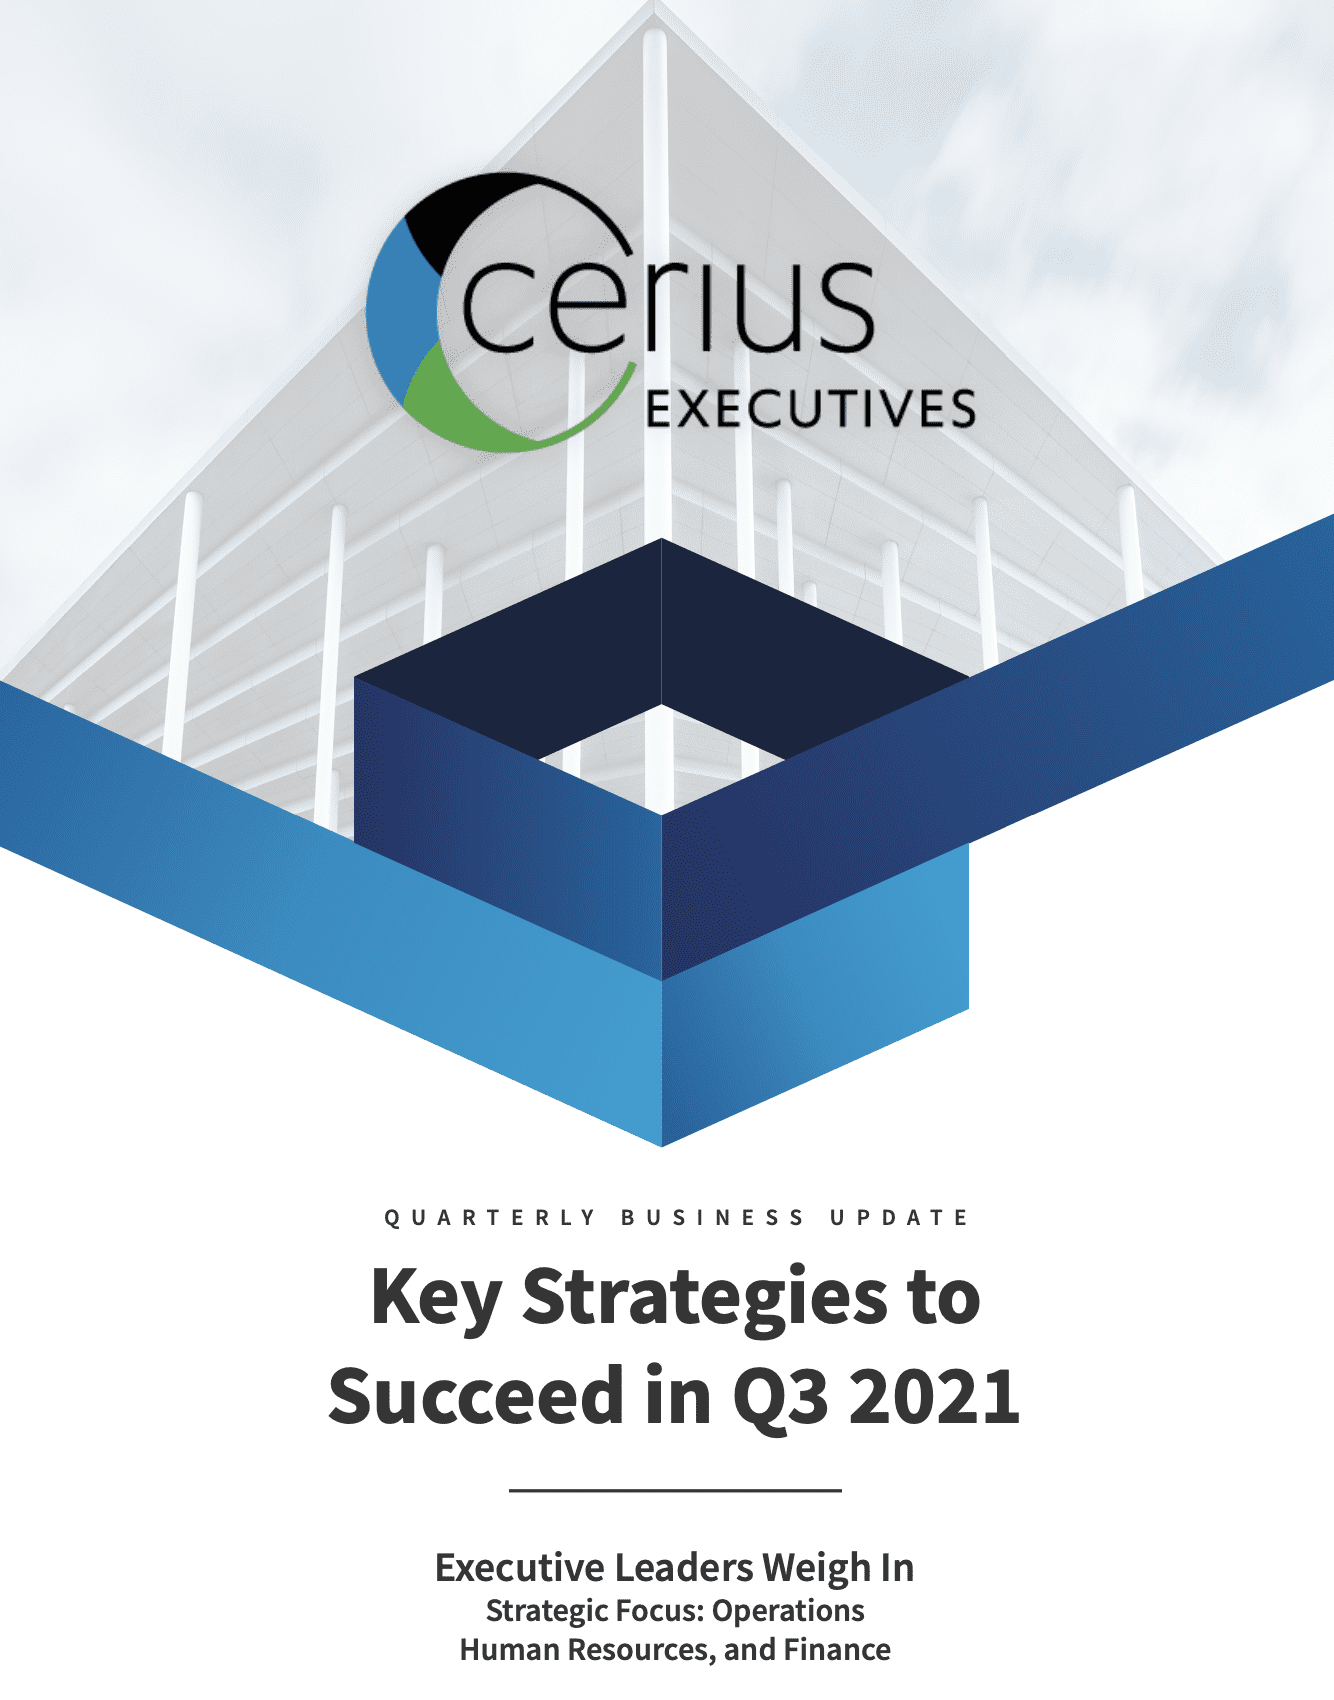 Quarterly Business Update: Key Strategies to Succeed in Q3 2021